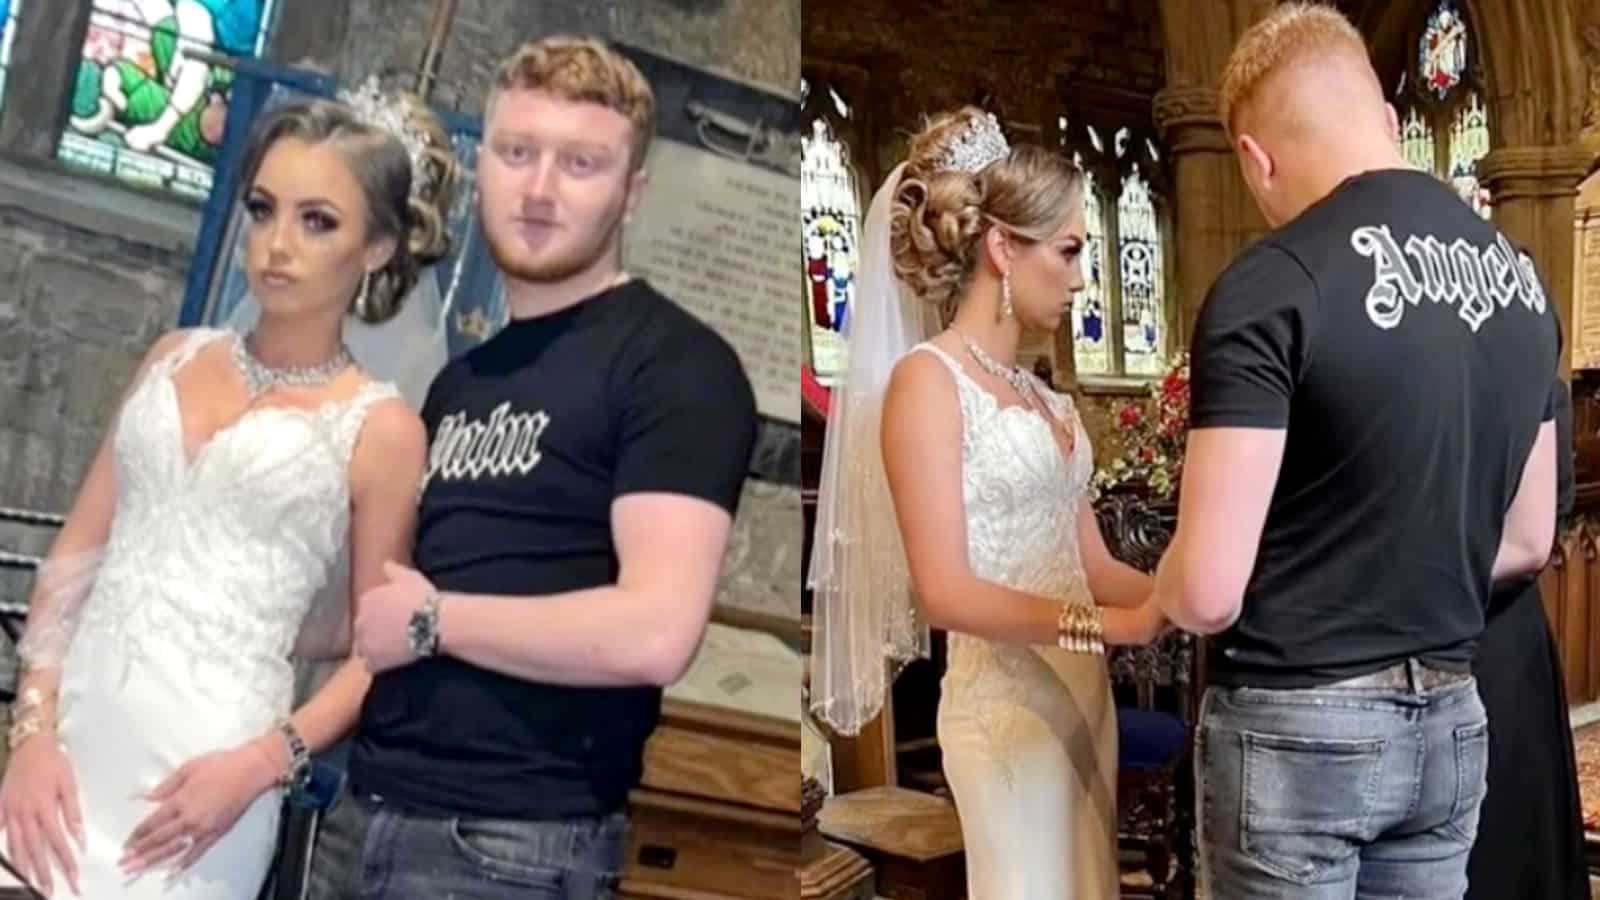 Wedding TikTok goes viral after man wears t-shirt & jeans to get married - Dexerto